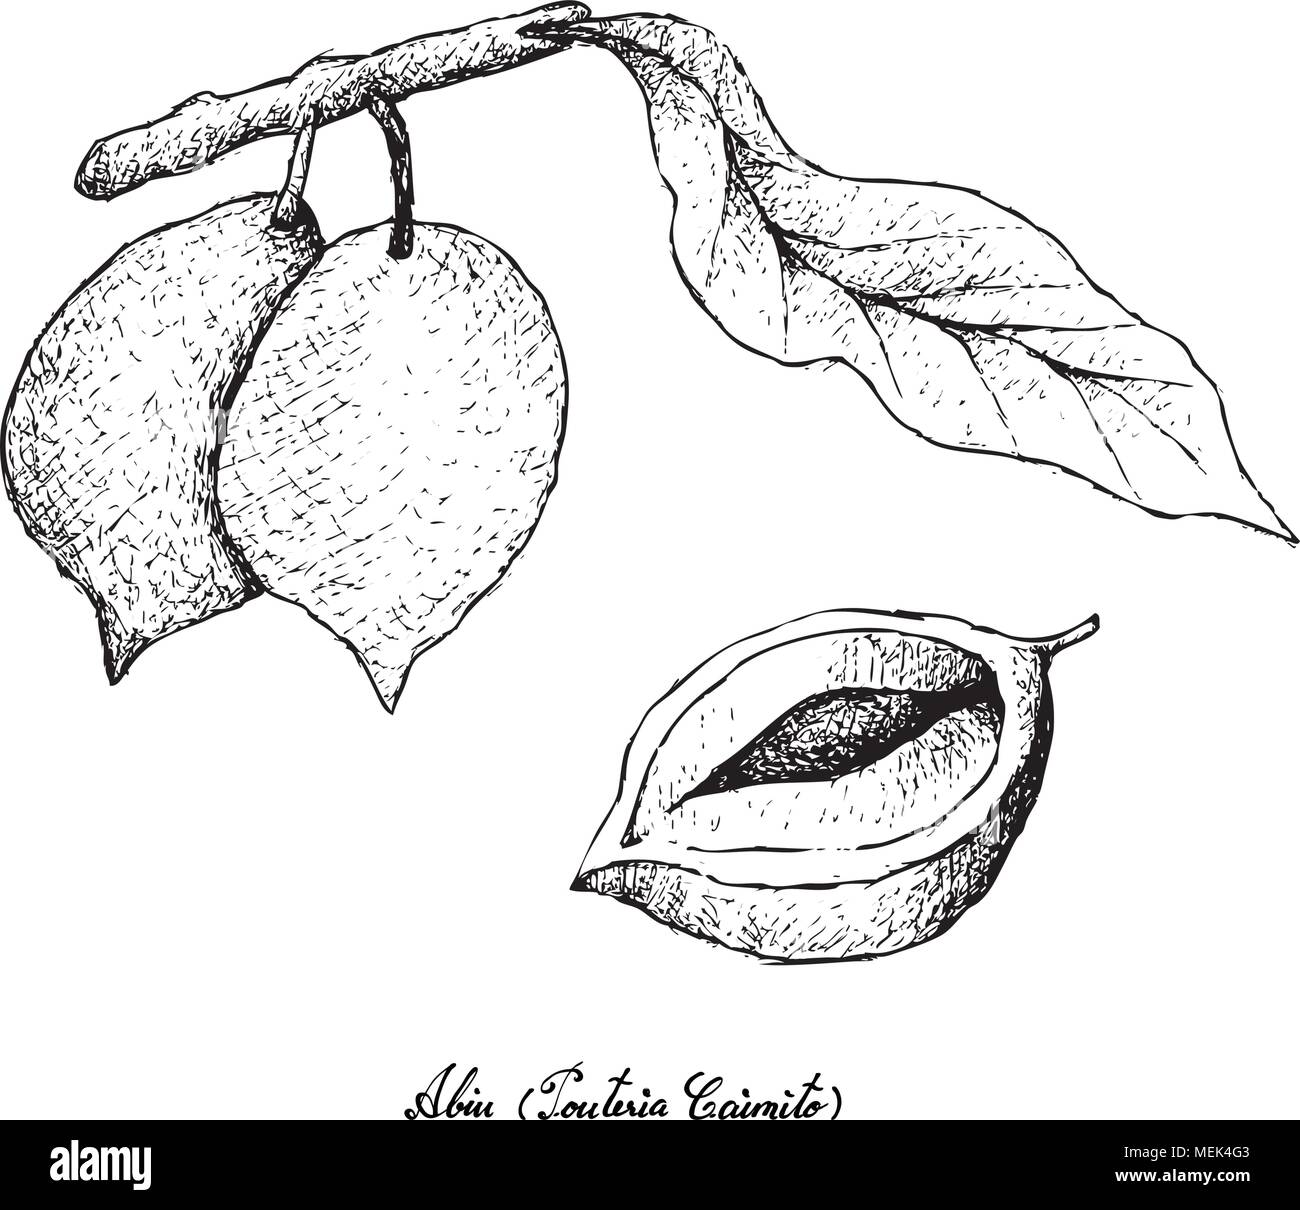 Tropical Fruits, Illustration Hand Drawn Sketch of Abiu or Pouteria Caimito Fruits Isolated on A White Background. High in Vitamin C With Essential Nu Stock Vector